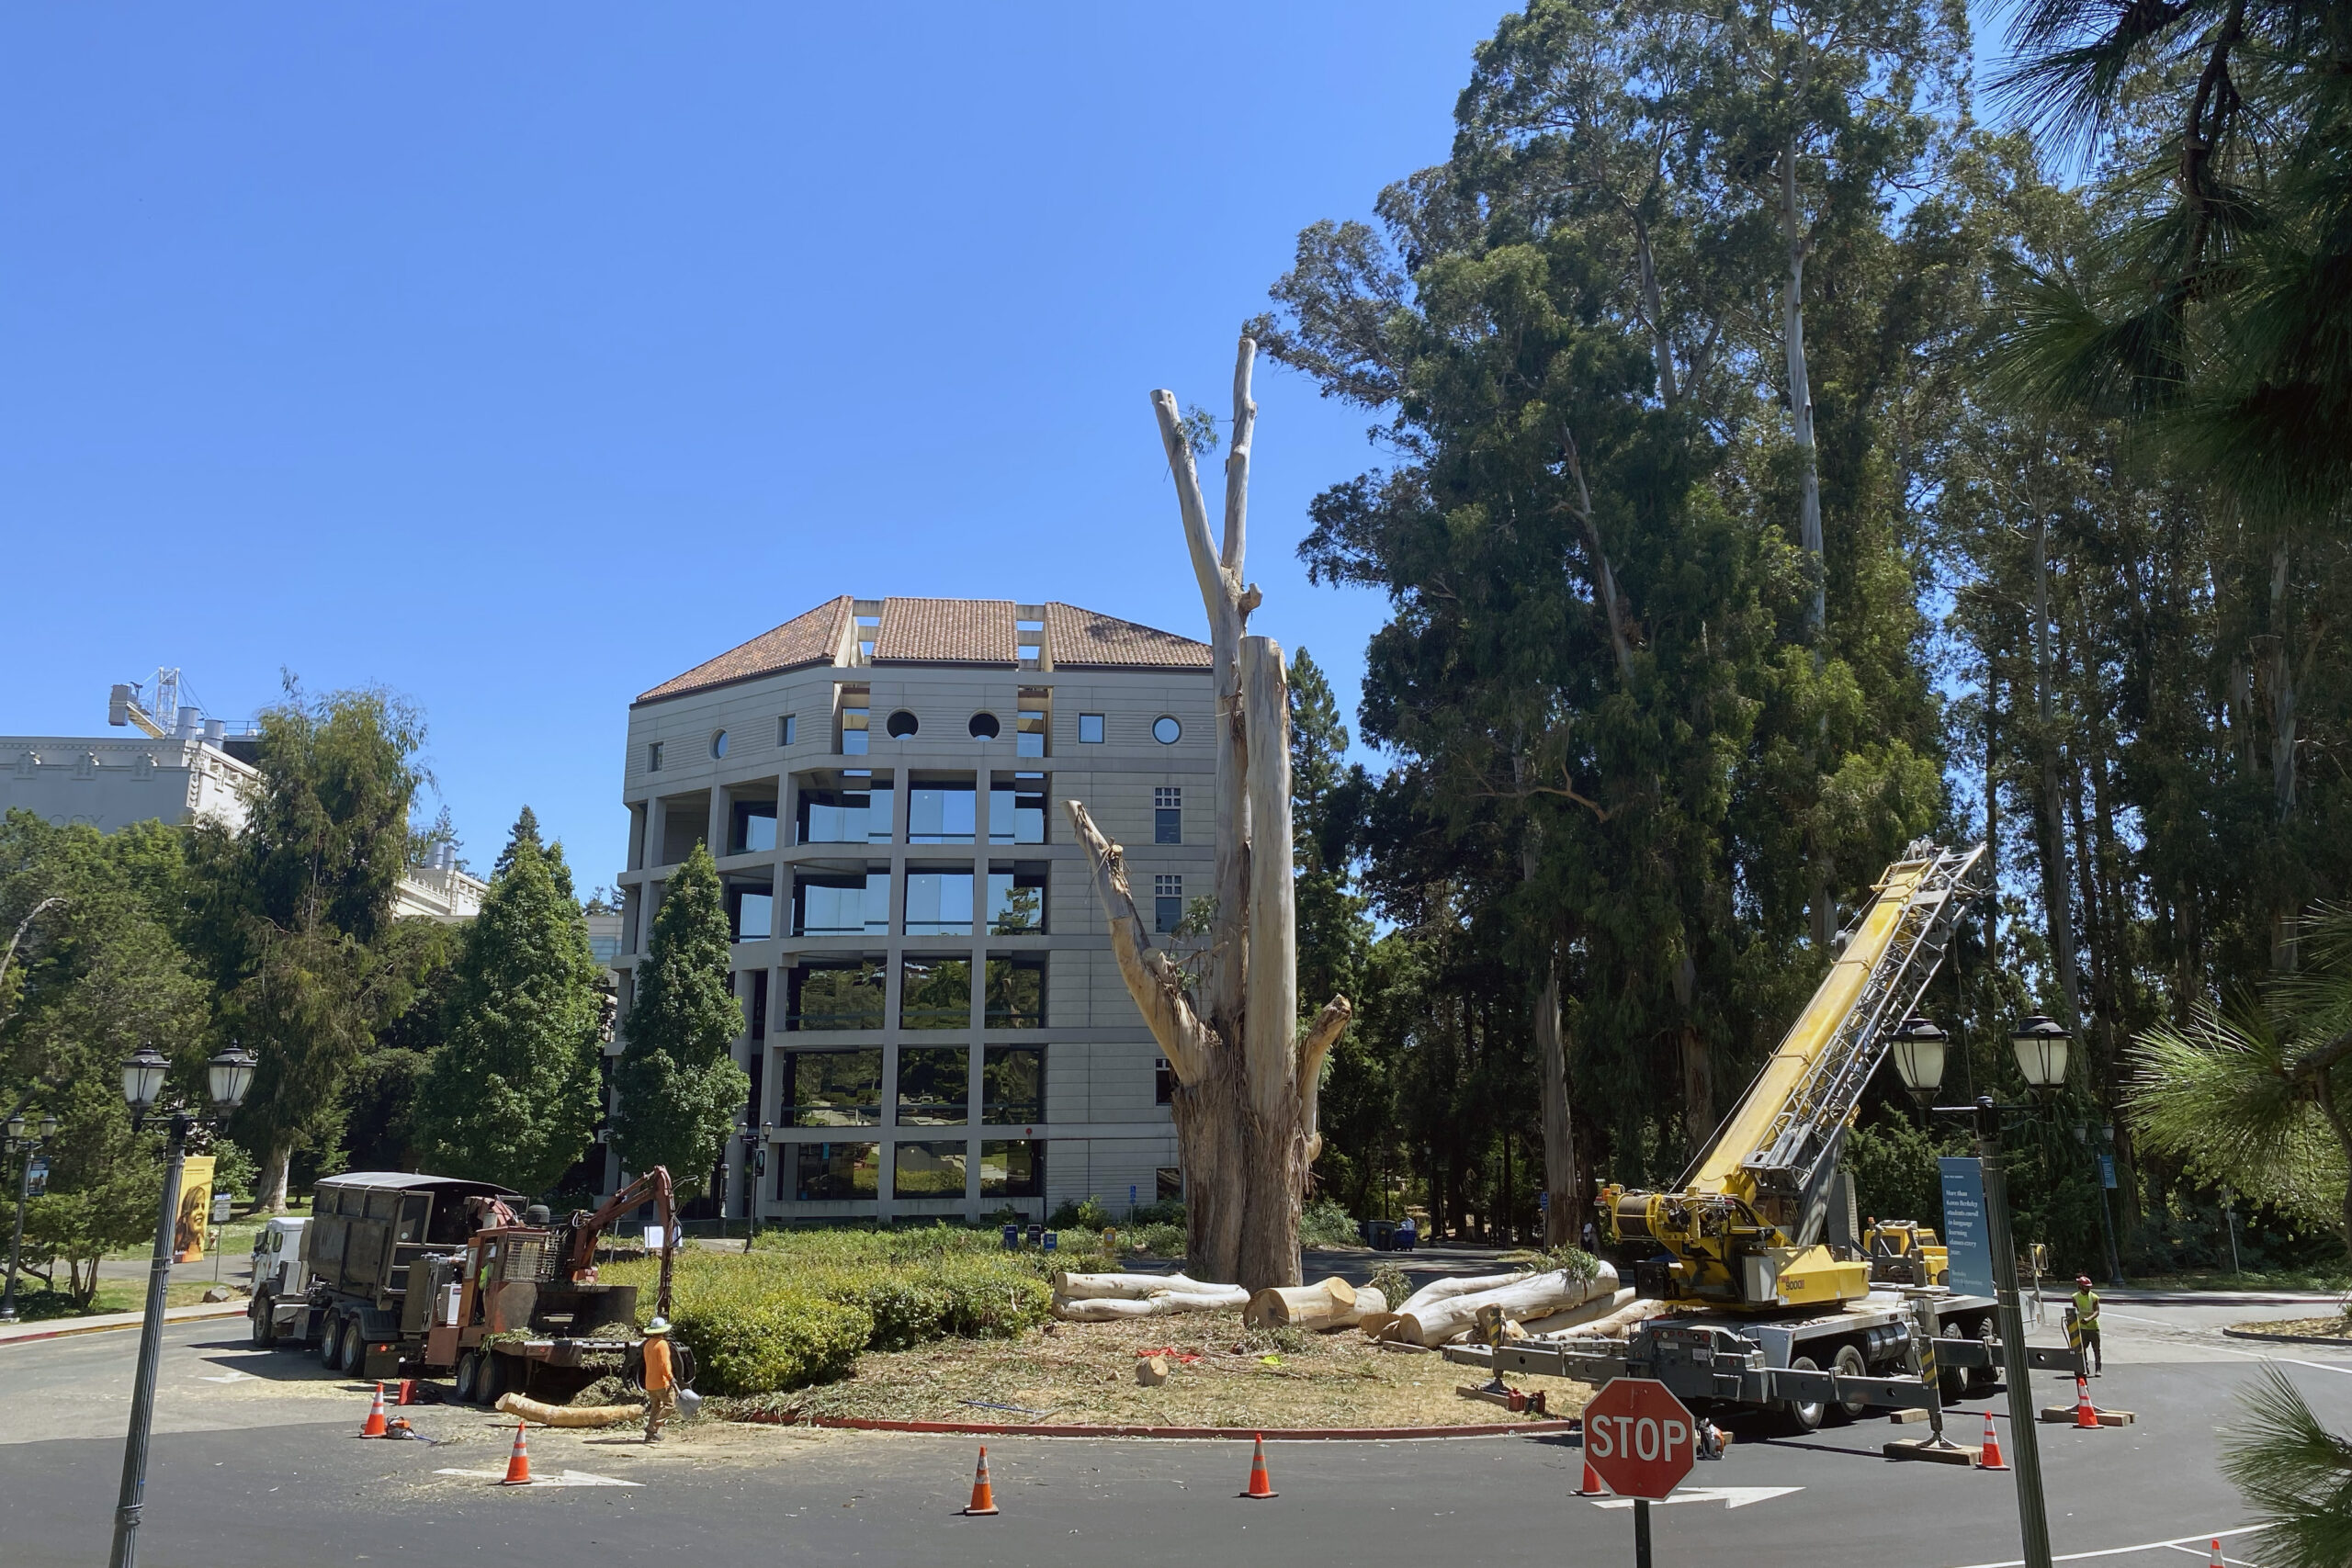 A large tree is being removed in front of a multi-story building. The tree trunk has been cut down significantly, and there are several large logs lying on the ground. Construction equipment and workers are on-site, with a crane positioned nearby. Orange safety cones and a stop sign are visible, indicating an active work zone.